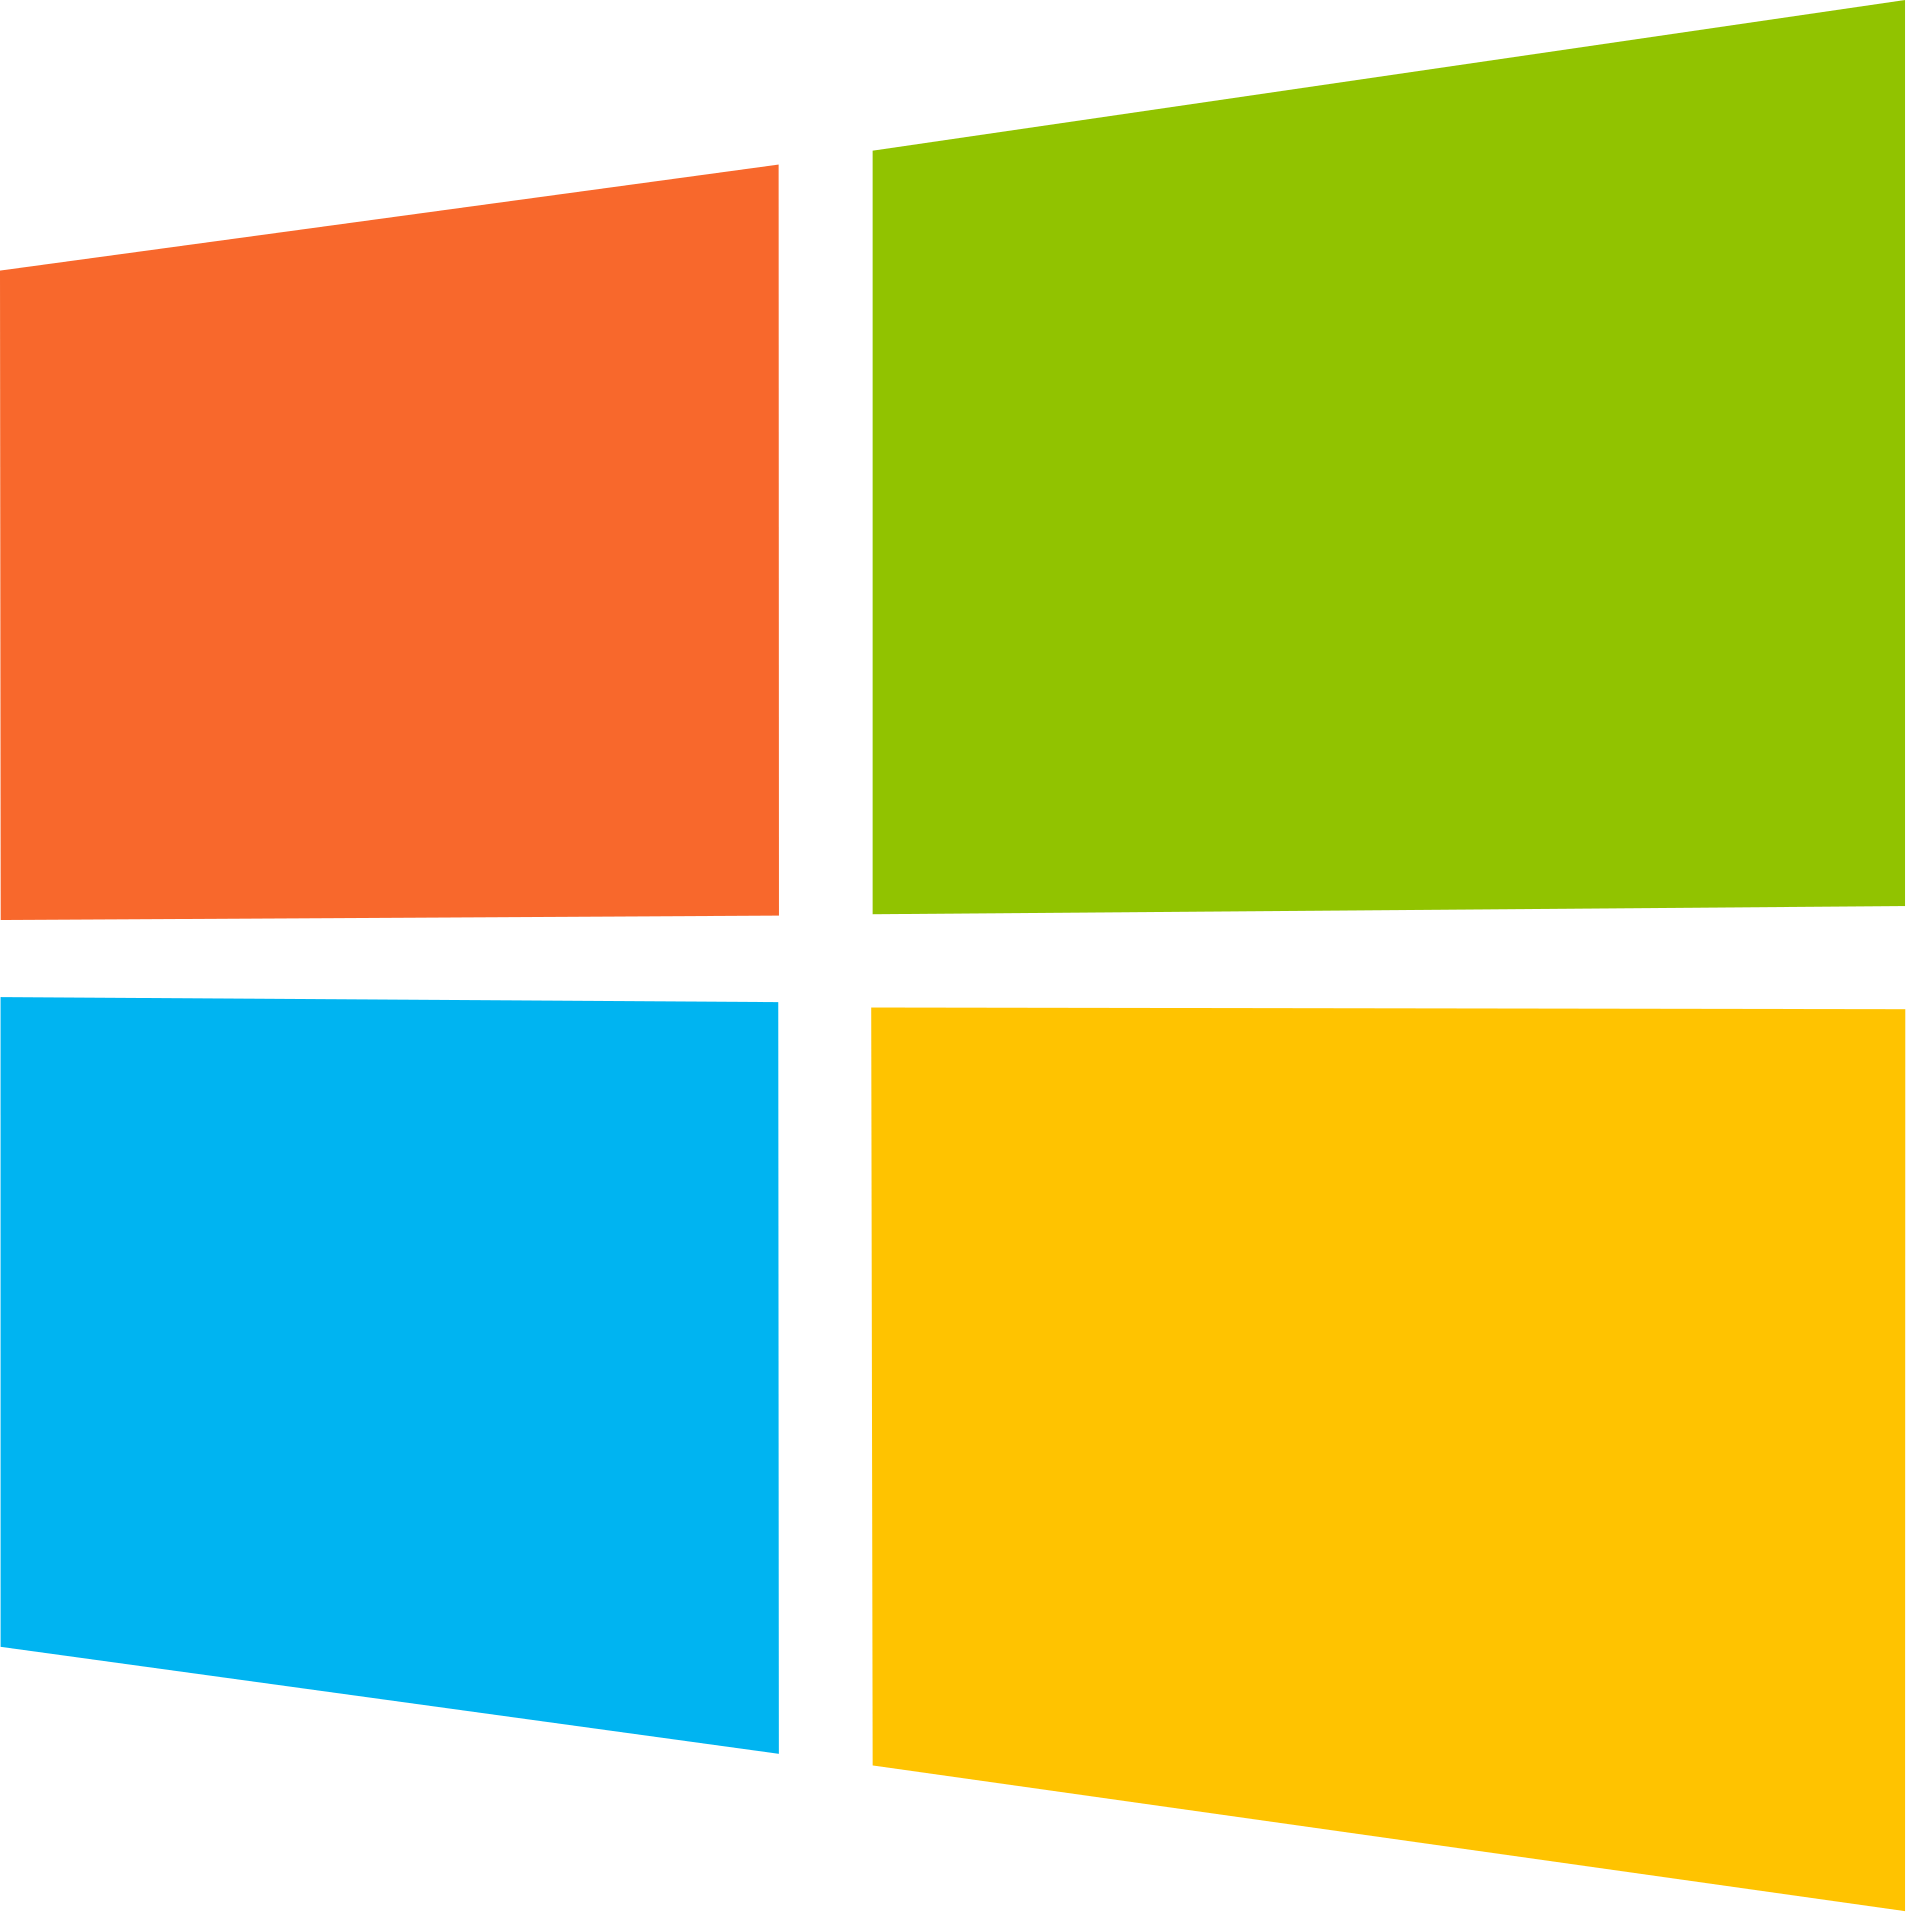 Microsoft logo. Links to Reach releases page on Github.